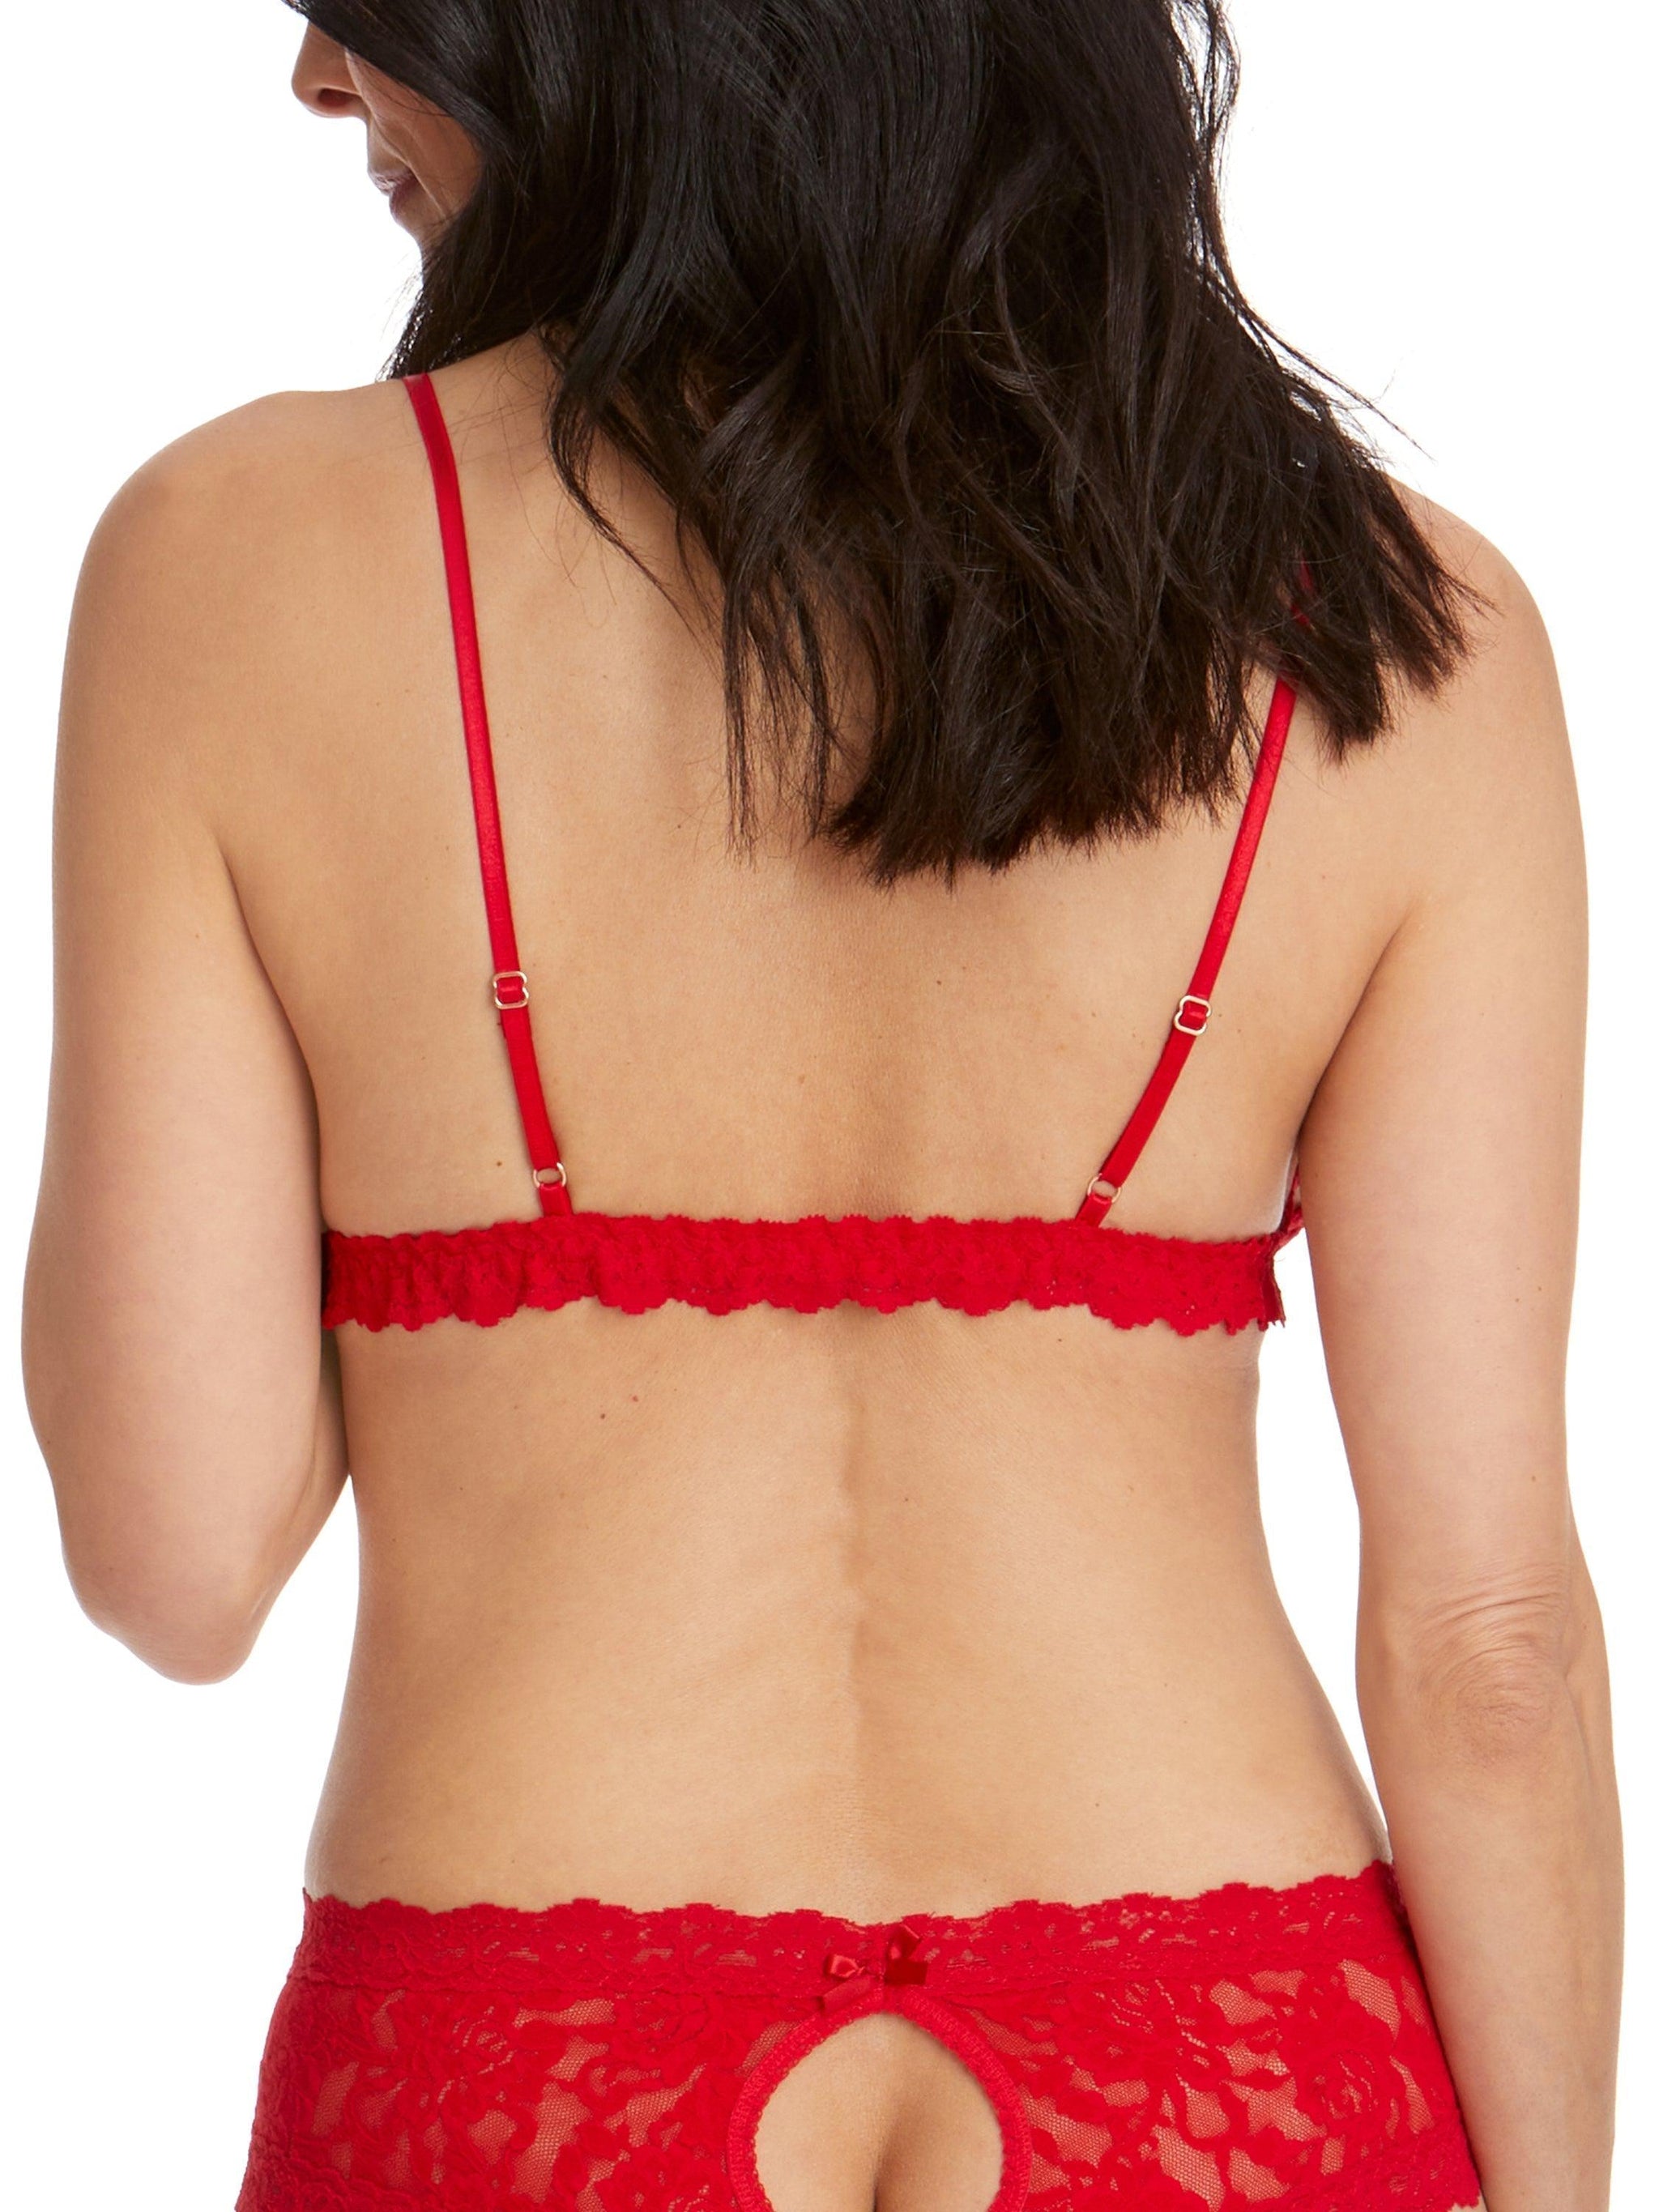 After Midnight Naughty & Nice Boxed Thong Set Black/Red O/S